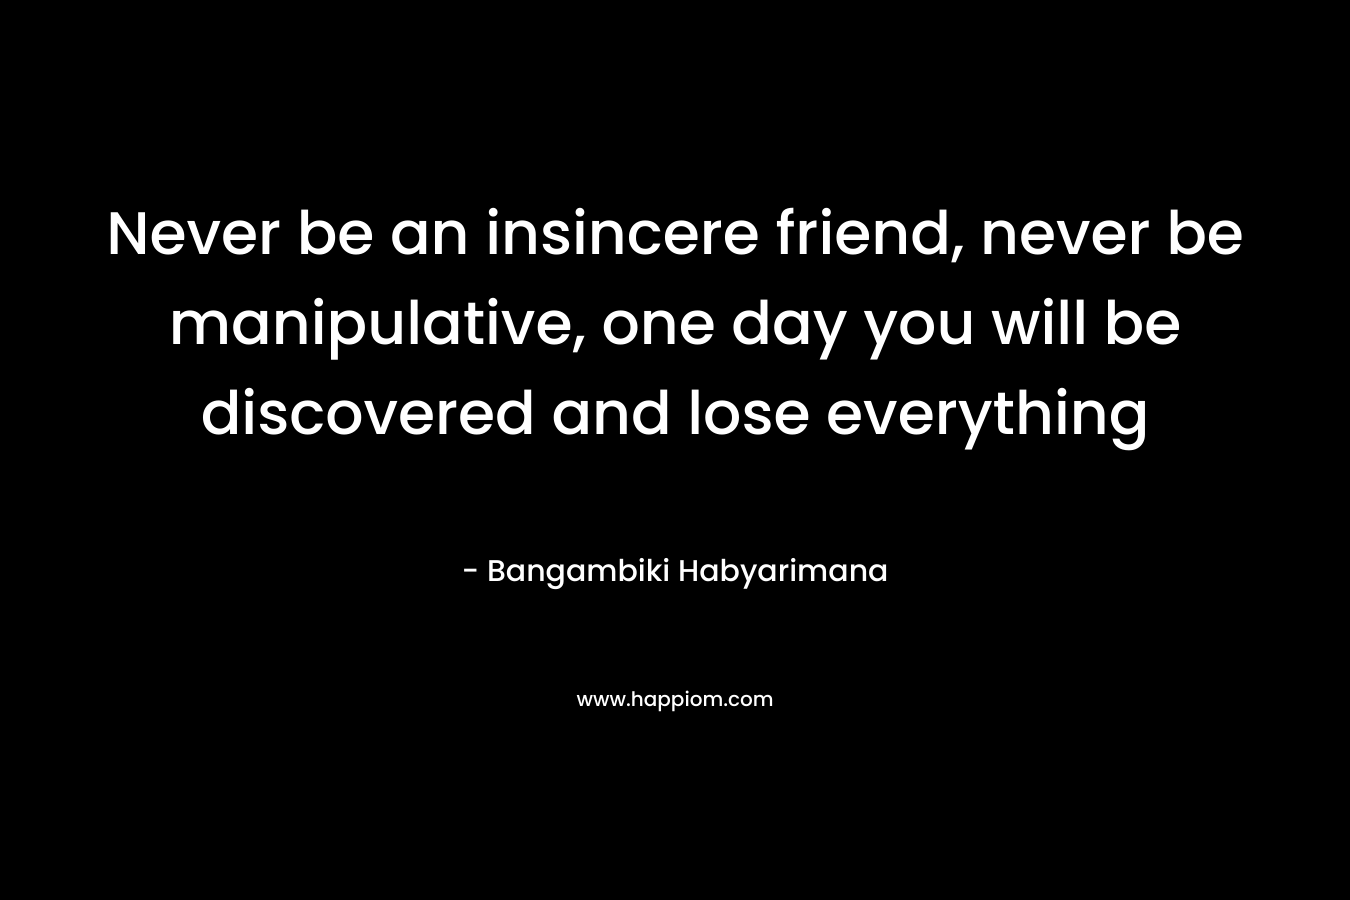 Never be an insincere friend, never be manipulative, one day you will be discovered and lose everything